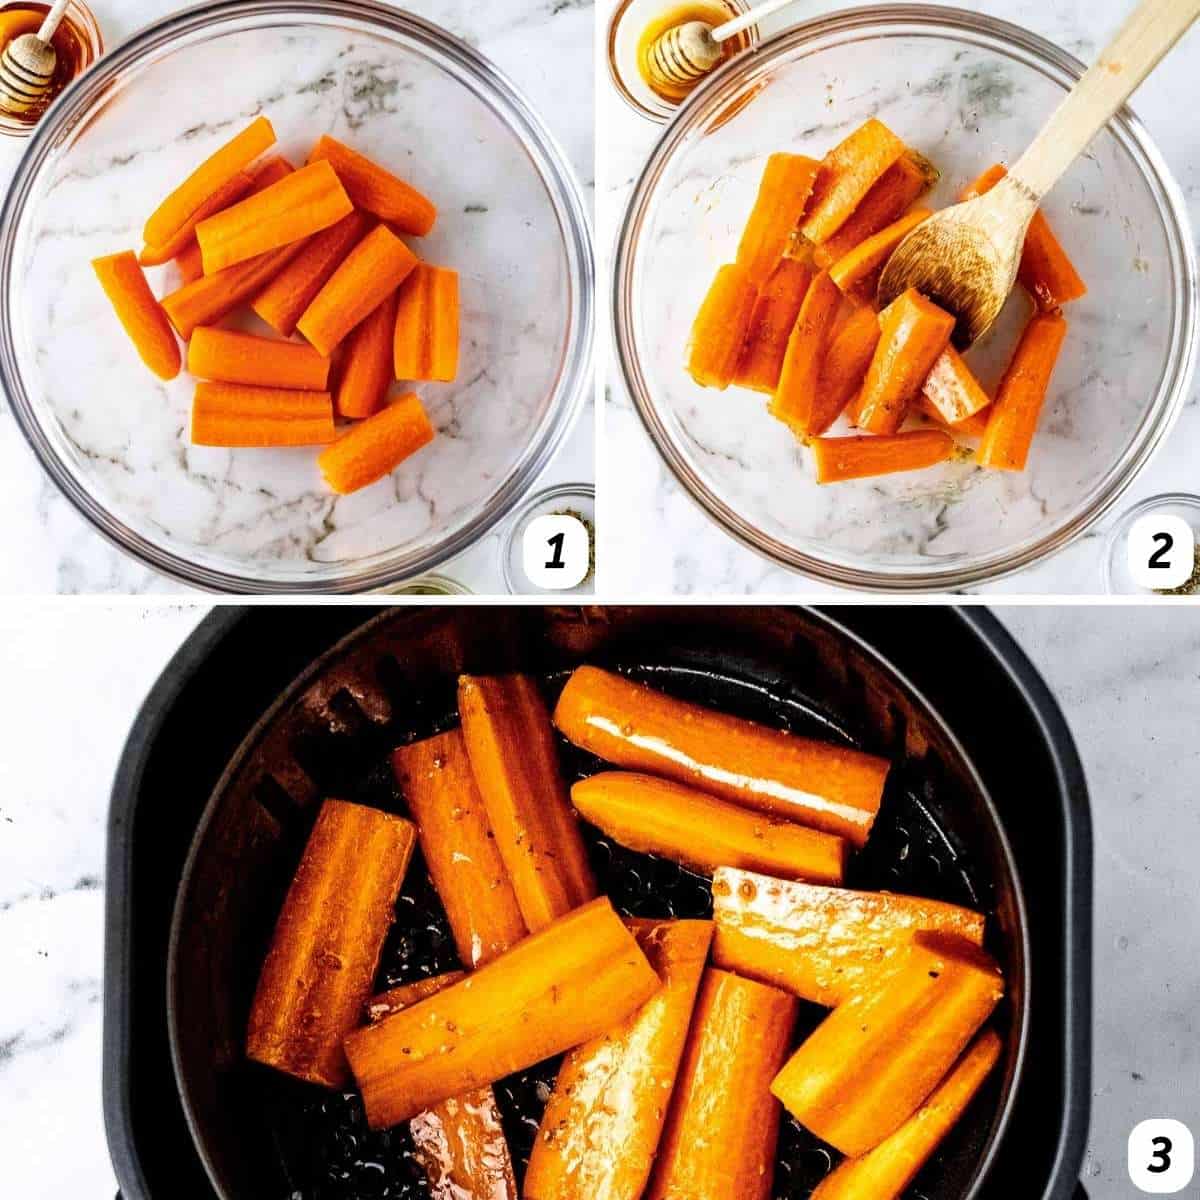 Three panel grid of process shots - chopping carrots, coating with seasonings, and cooking in the air fryer.